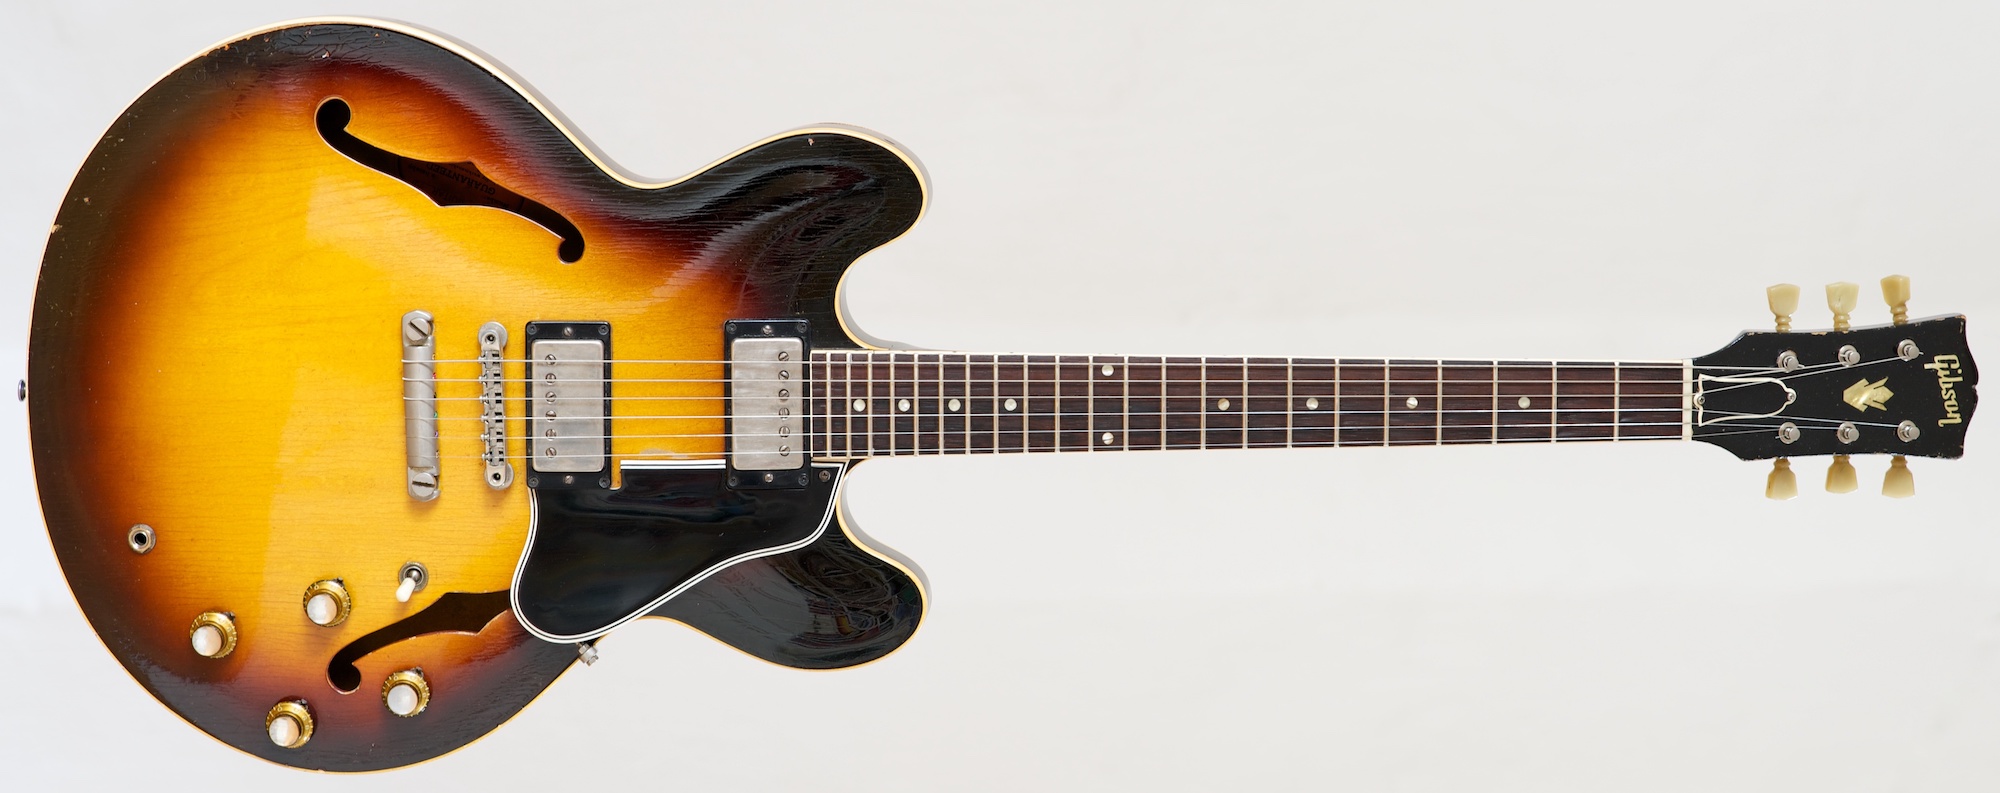 A Gibson ES-335TD from 1961